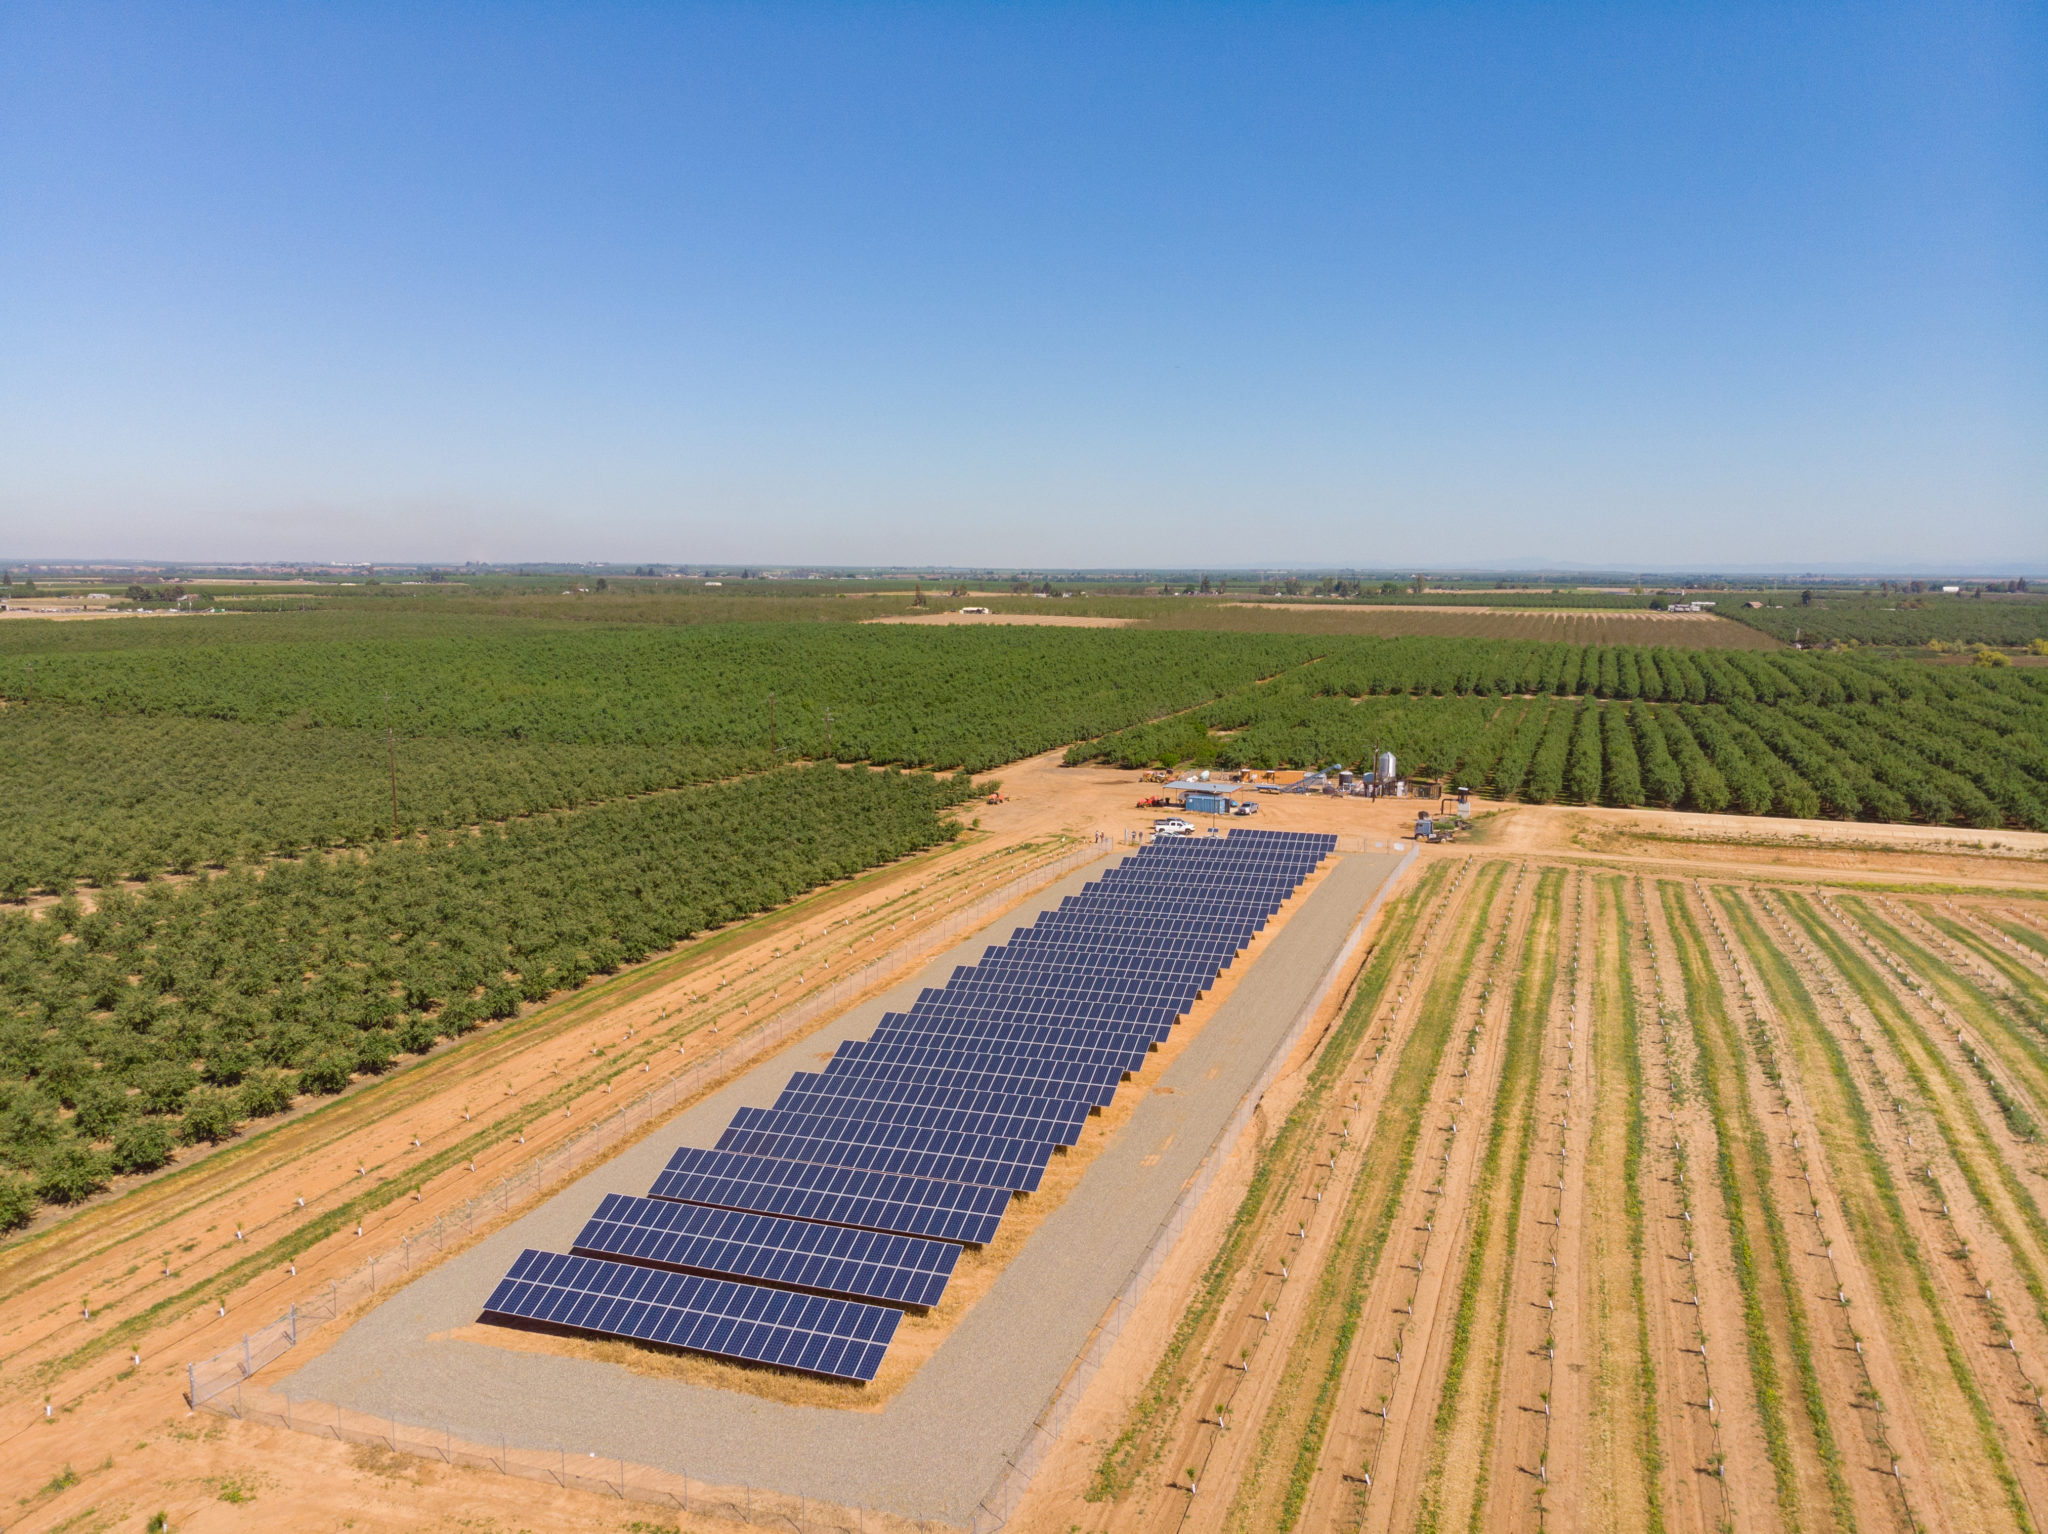 Aerial view of a small solar farm in Gustine, California with rows of crops in the background and a blue sky.